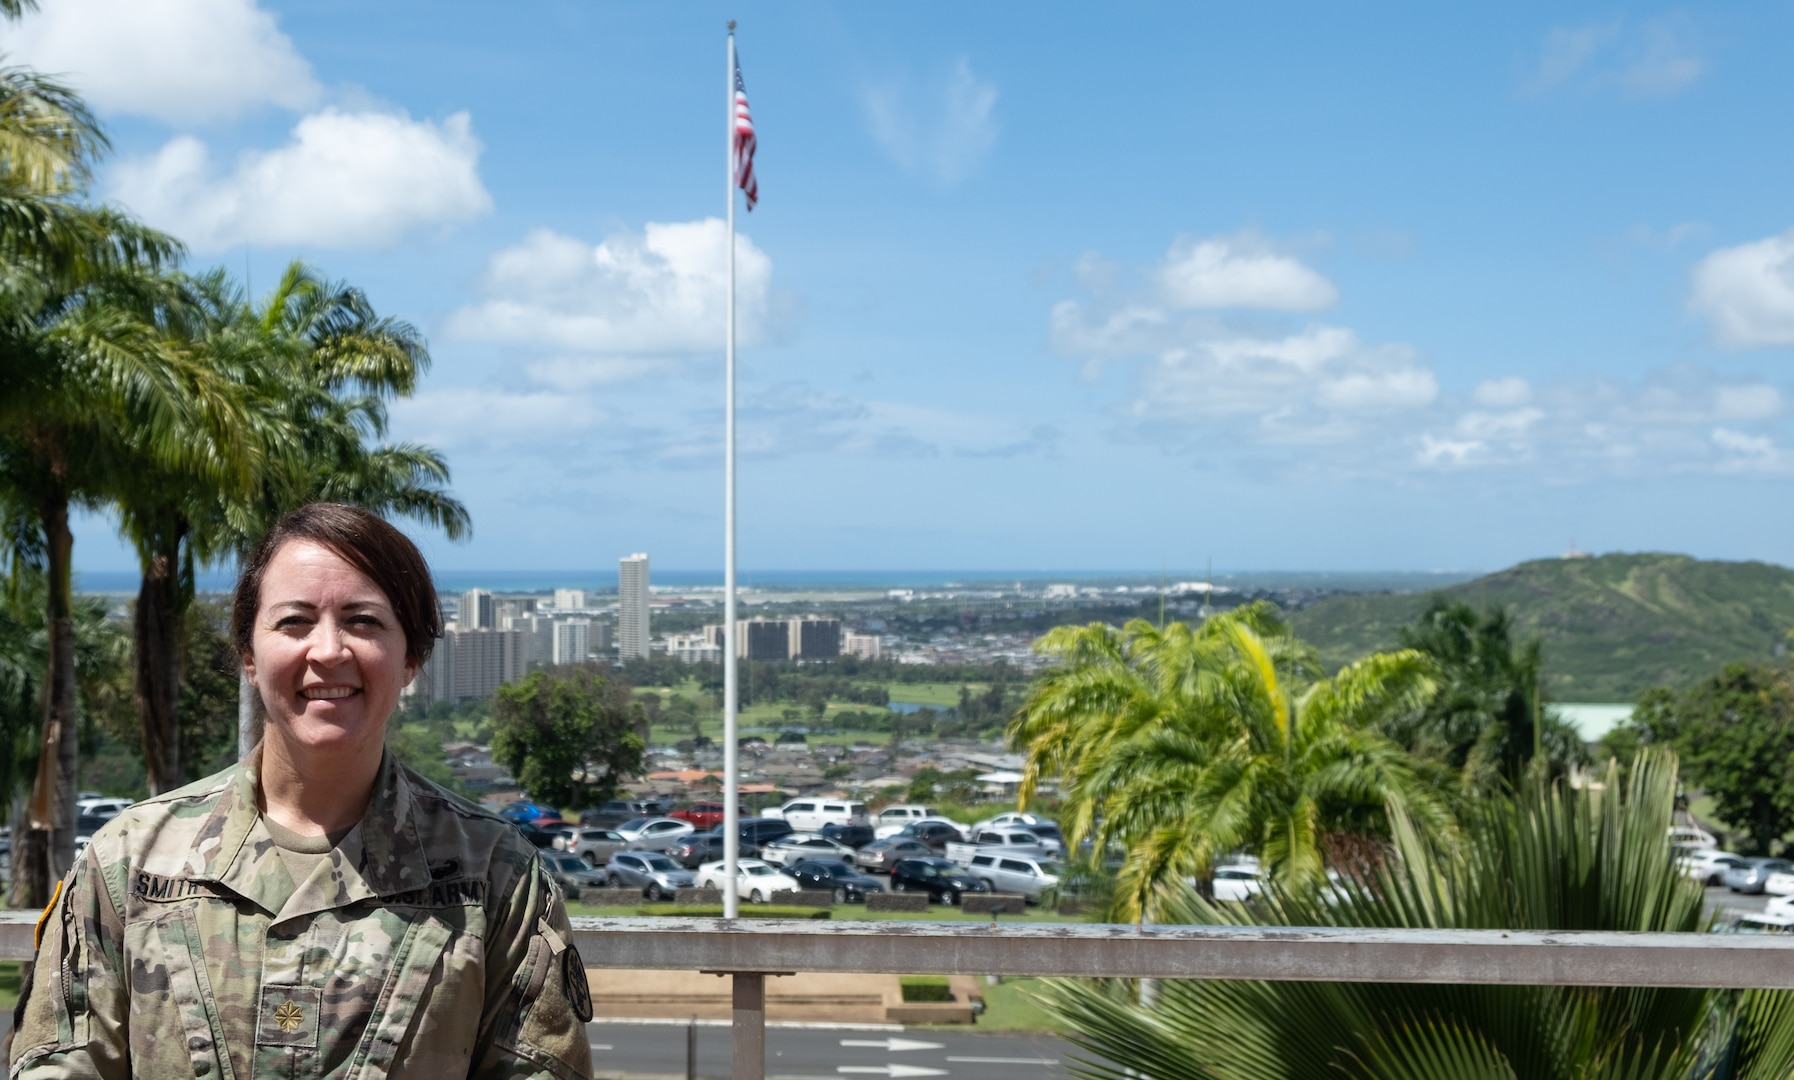 Meet Maj. Amber Smith, who has been an Army nurse for nearly 13 years. Smith serves as the Medical-Surgical Clinical Nurse Specialist, supporting Medical Surgical Nursing Department.